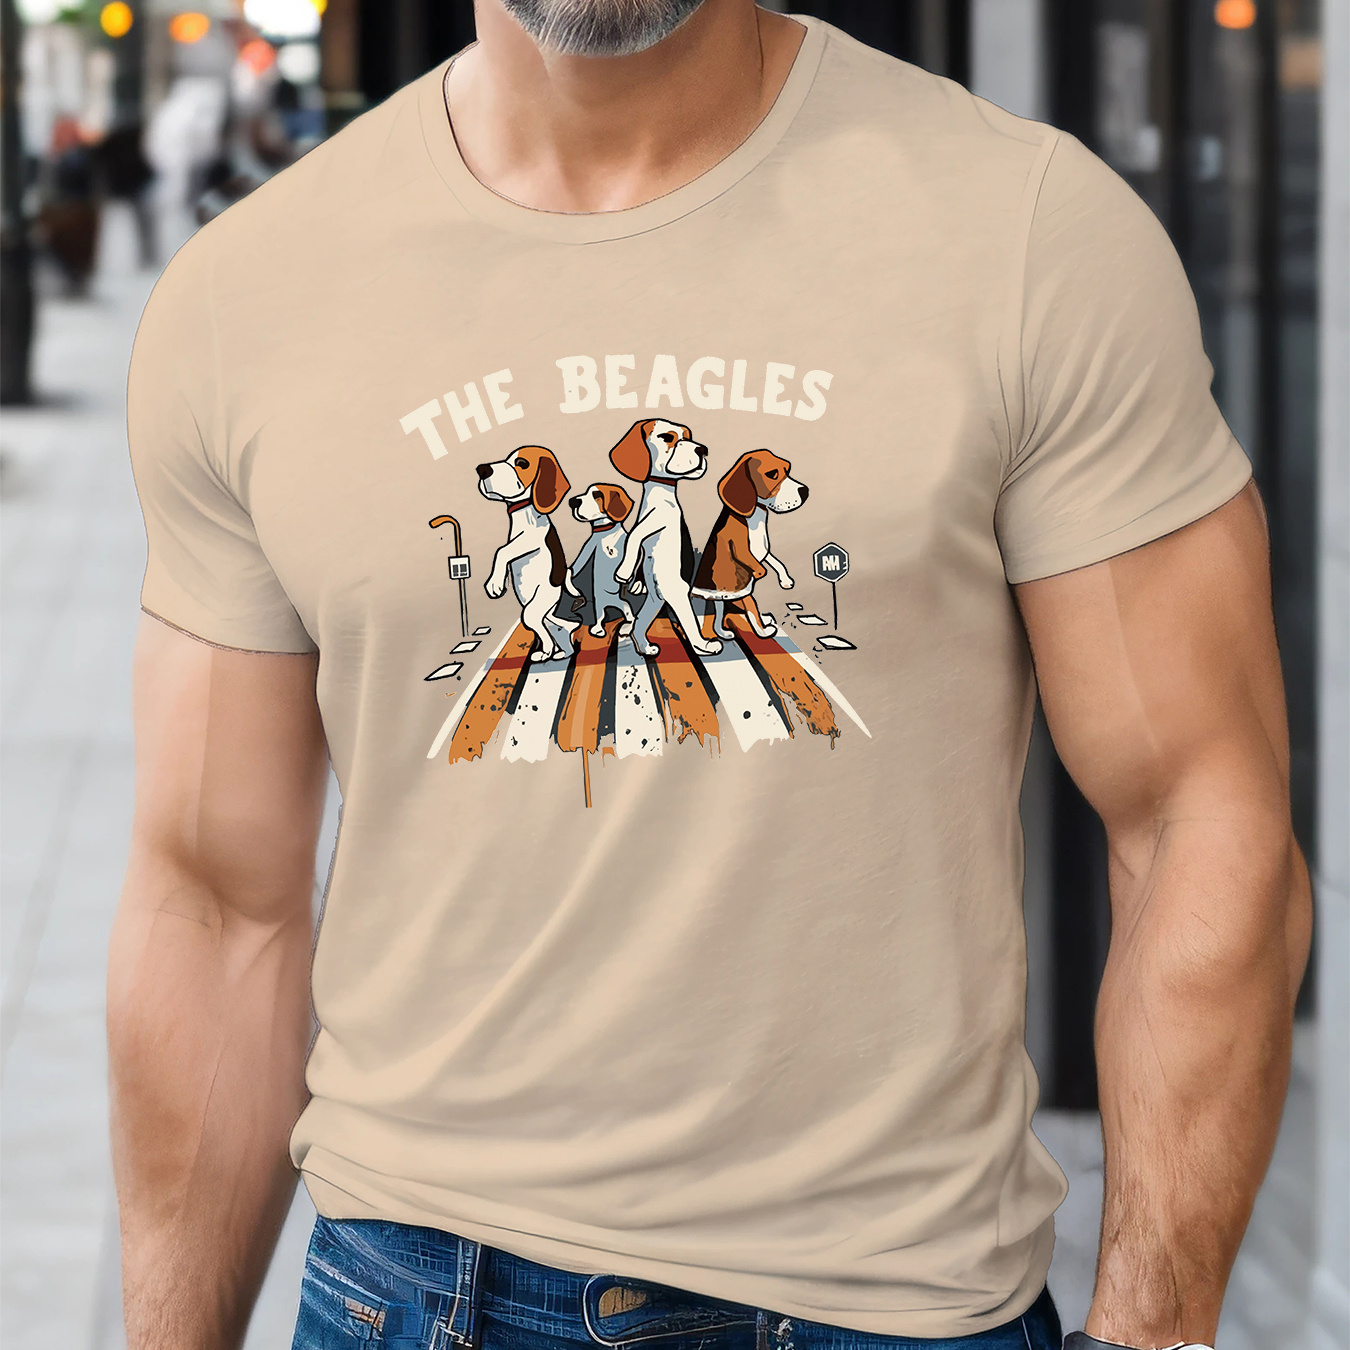 

The Beagles Print, Men's Fashion Comfy T-shirt, Casual Stretchy Breathable Top For Summer, Men's Clothing